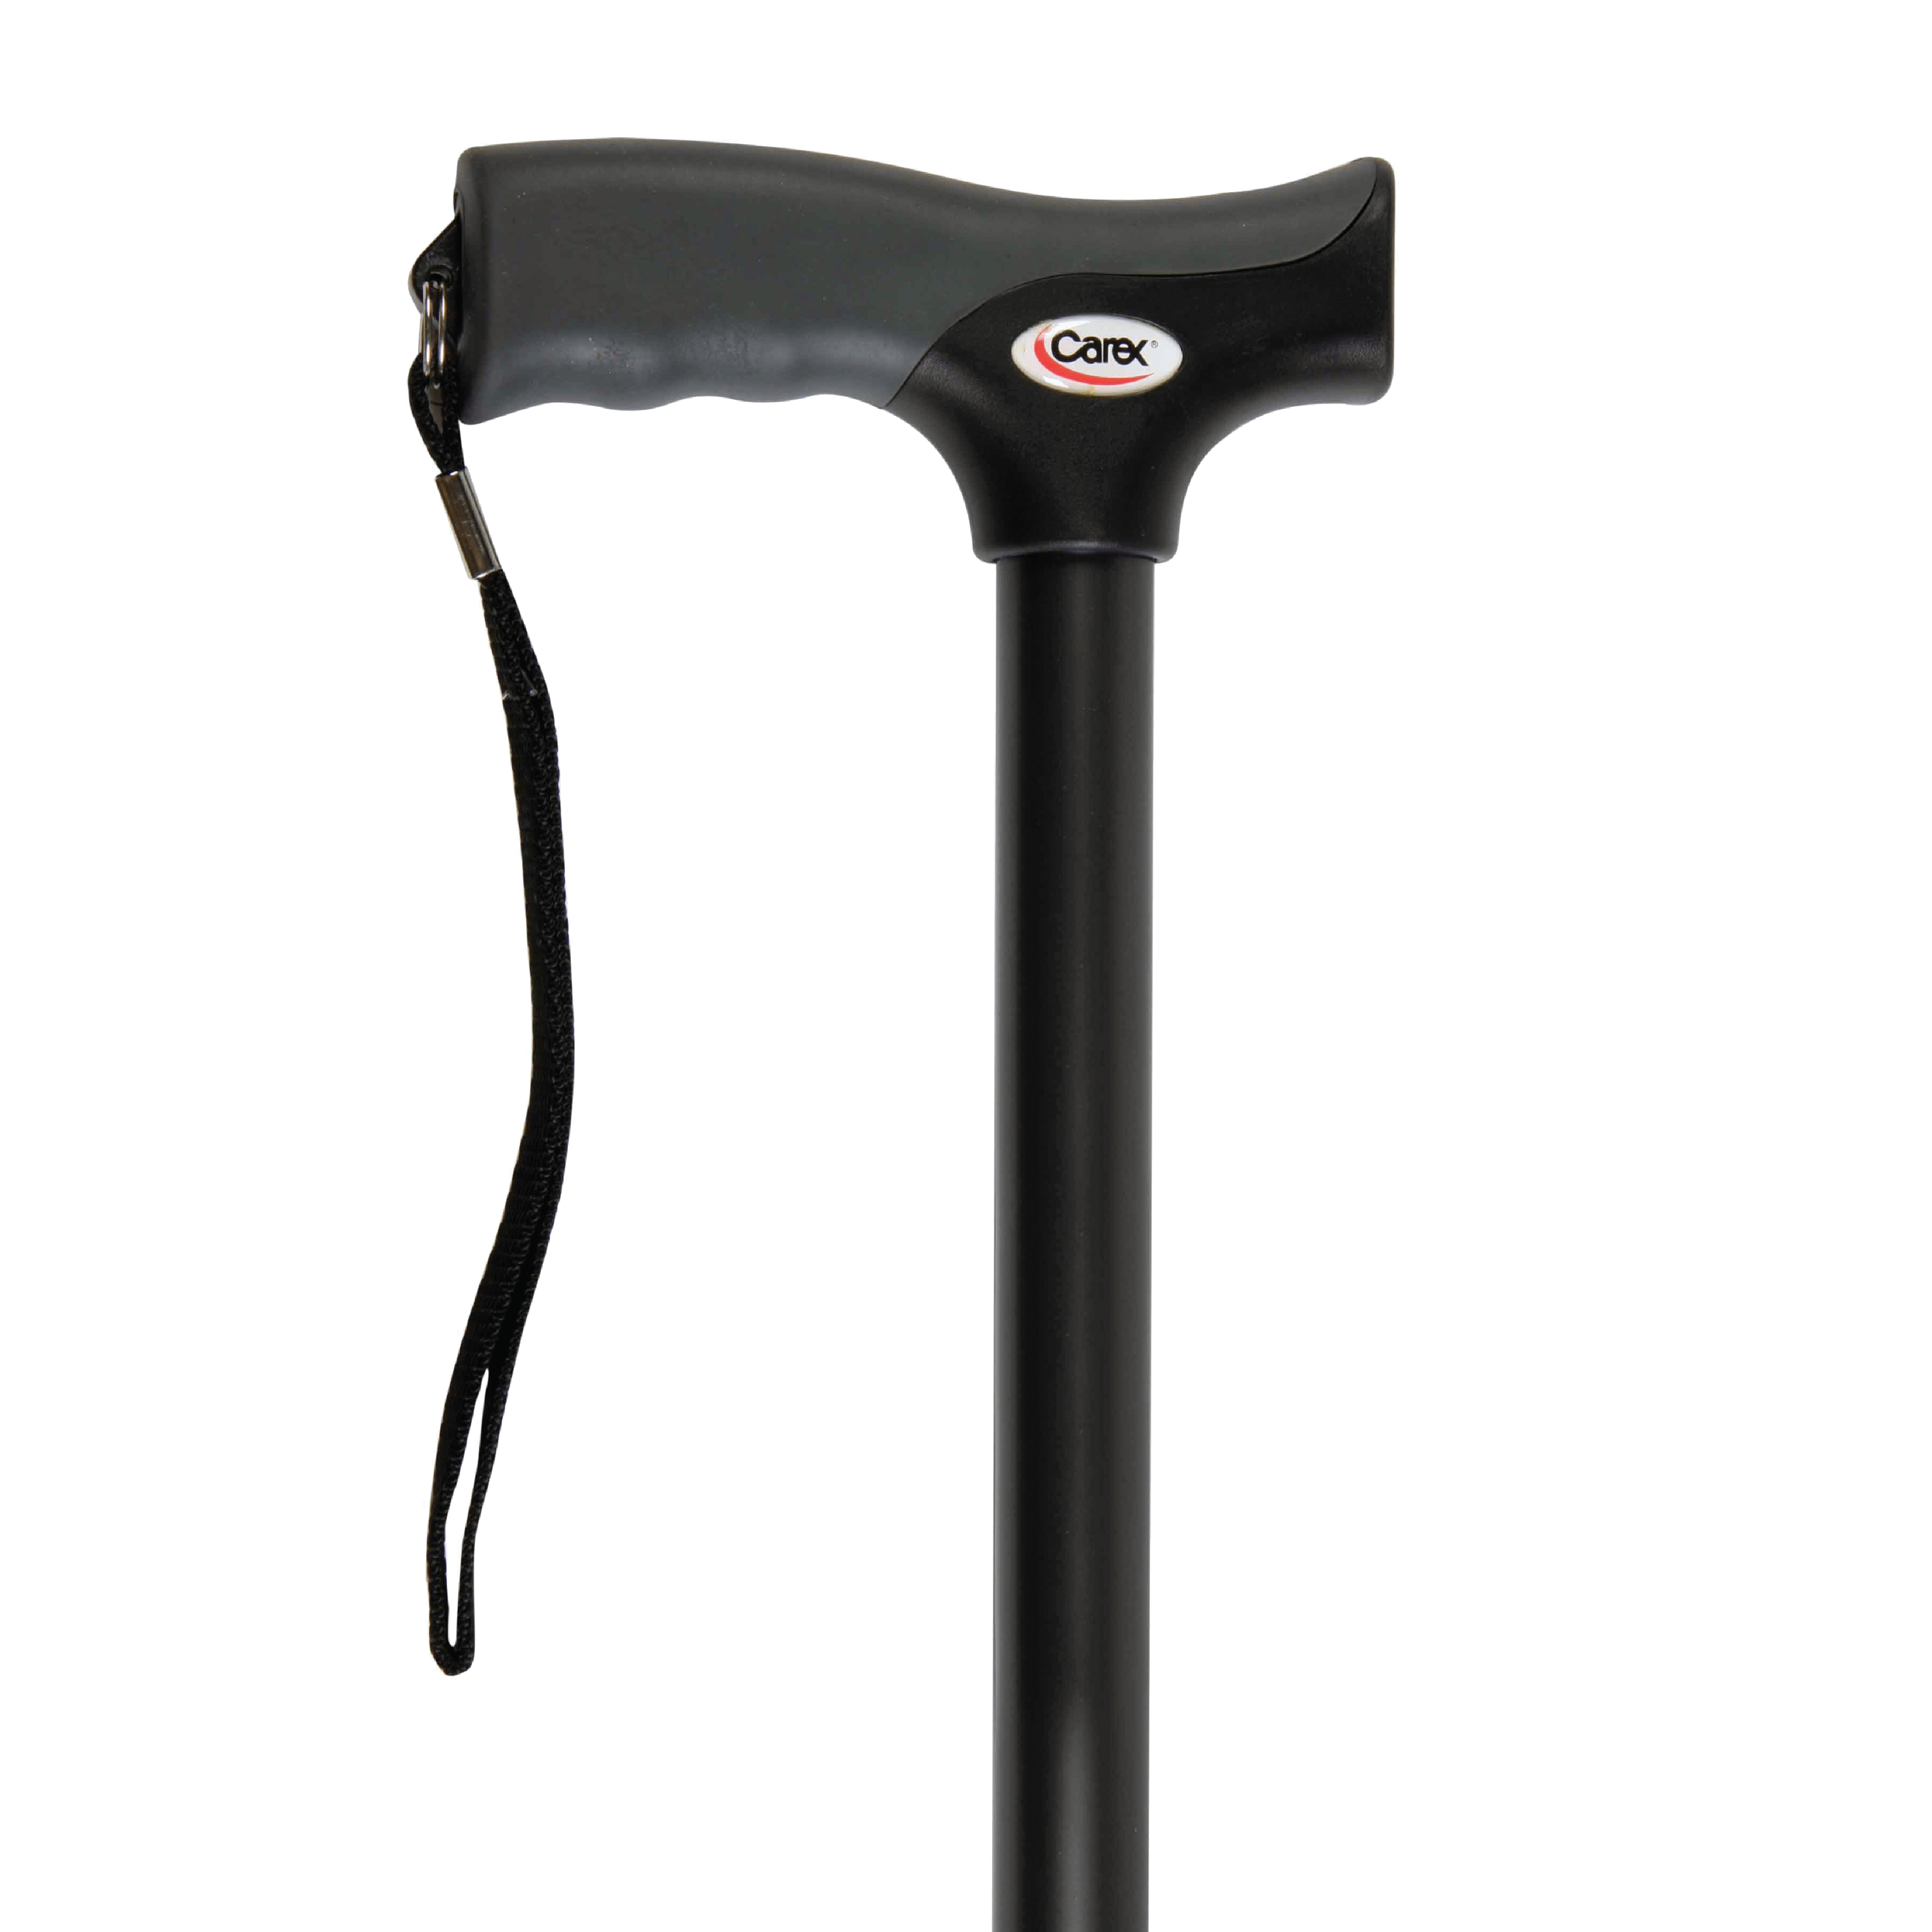 Days Adjustable Cane: Personalized Support for Every Step